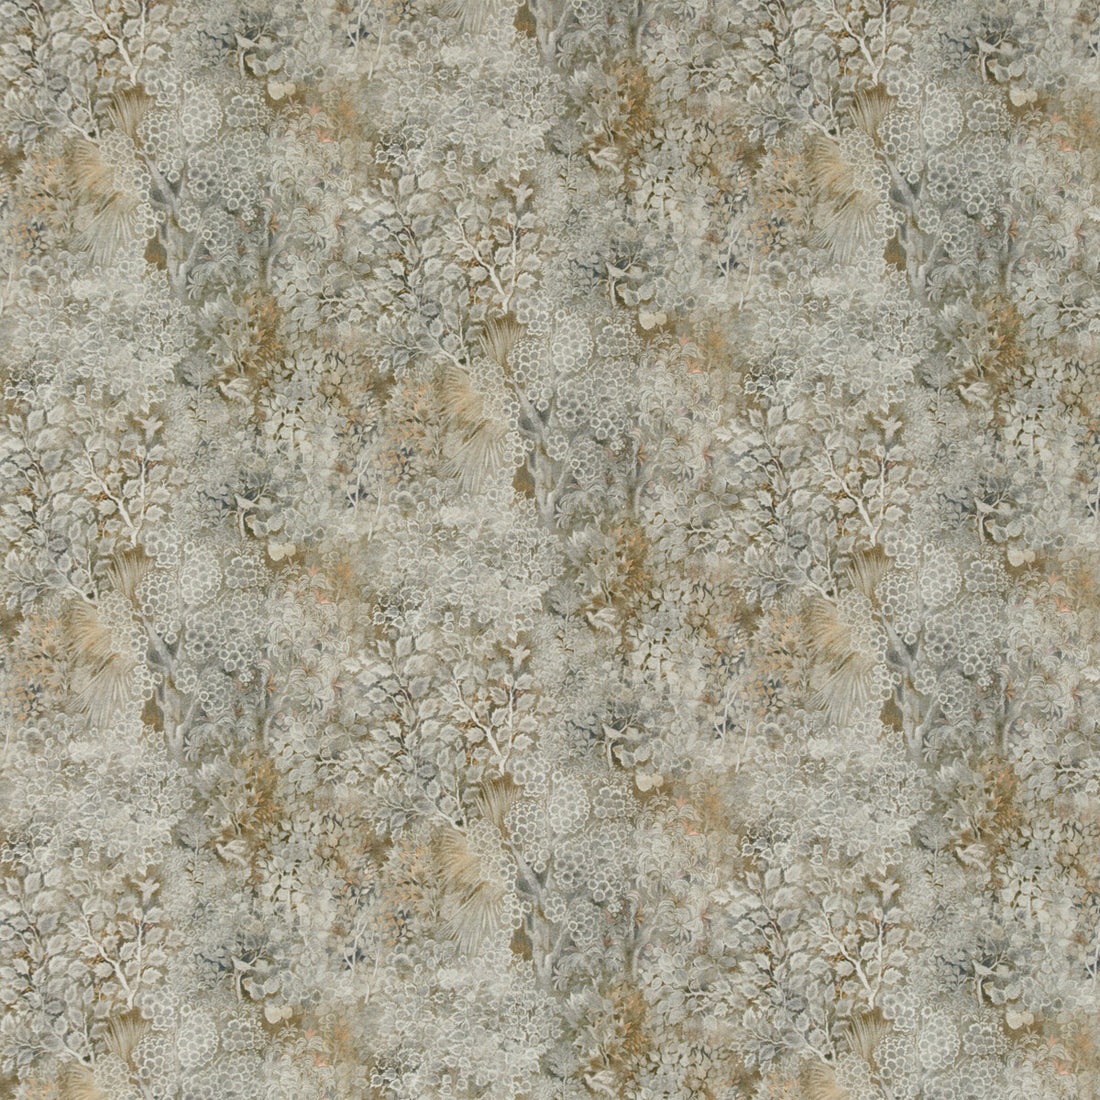 Persian Garden Linen fabric in natural color - pattern BP10704.2.0 - by G P &amp; J Baker in the East To West collection